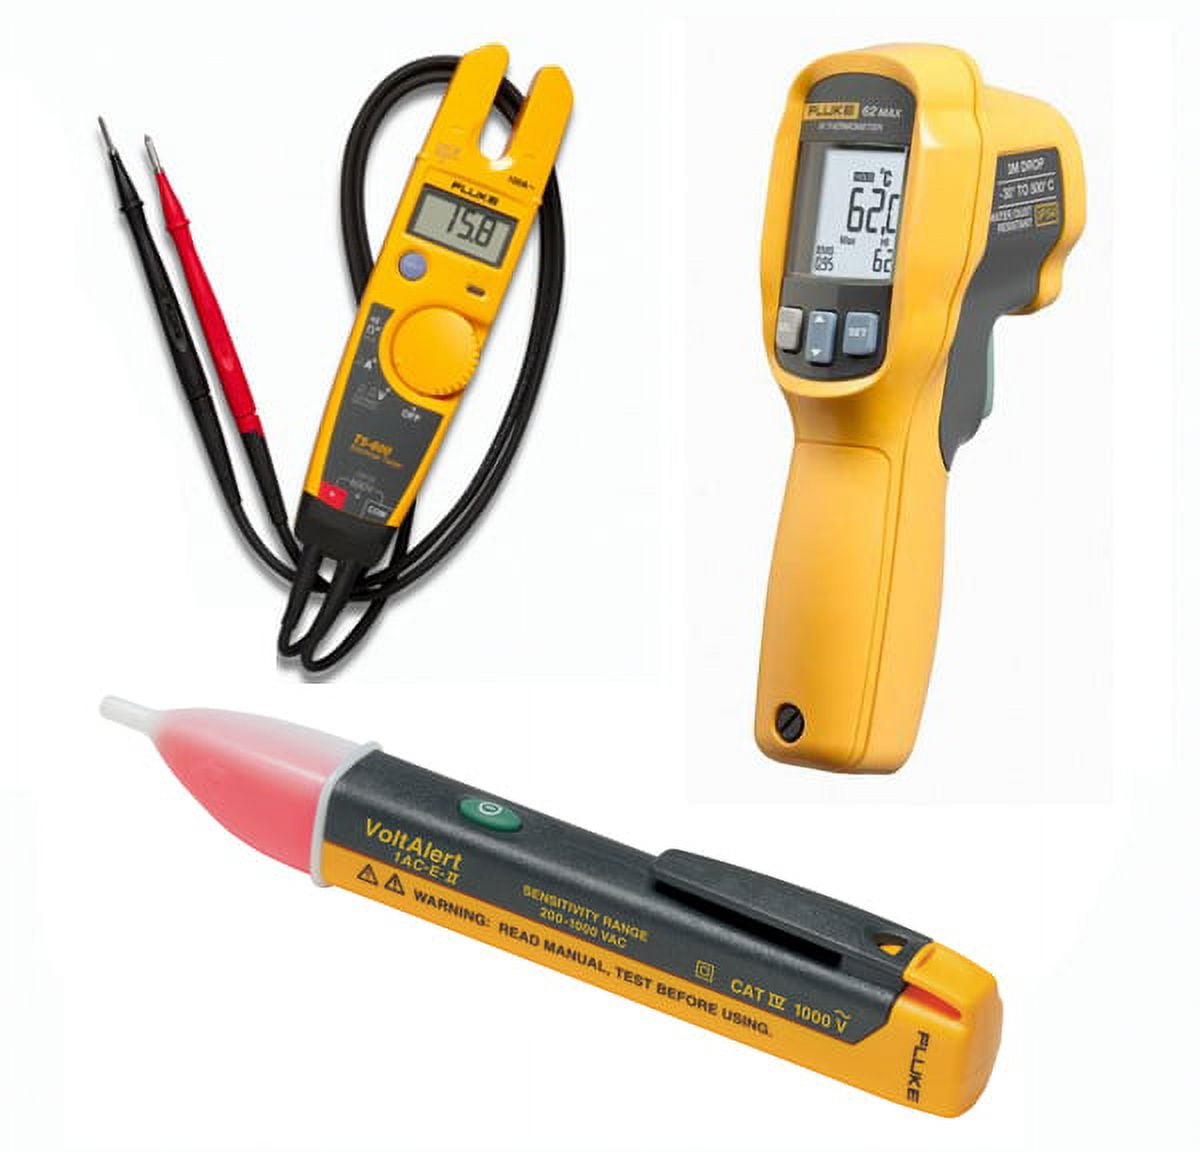 Save 10% on Fluke T5-600/62MAX+/1AC Thermometer, Electrical Tester